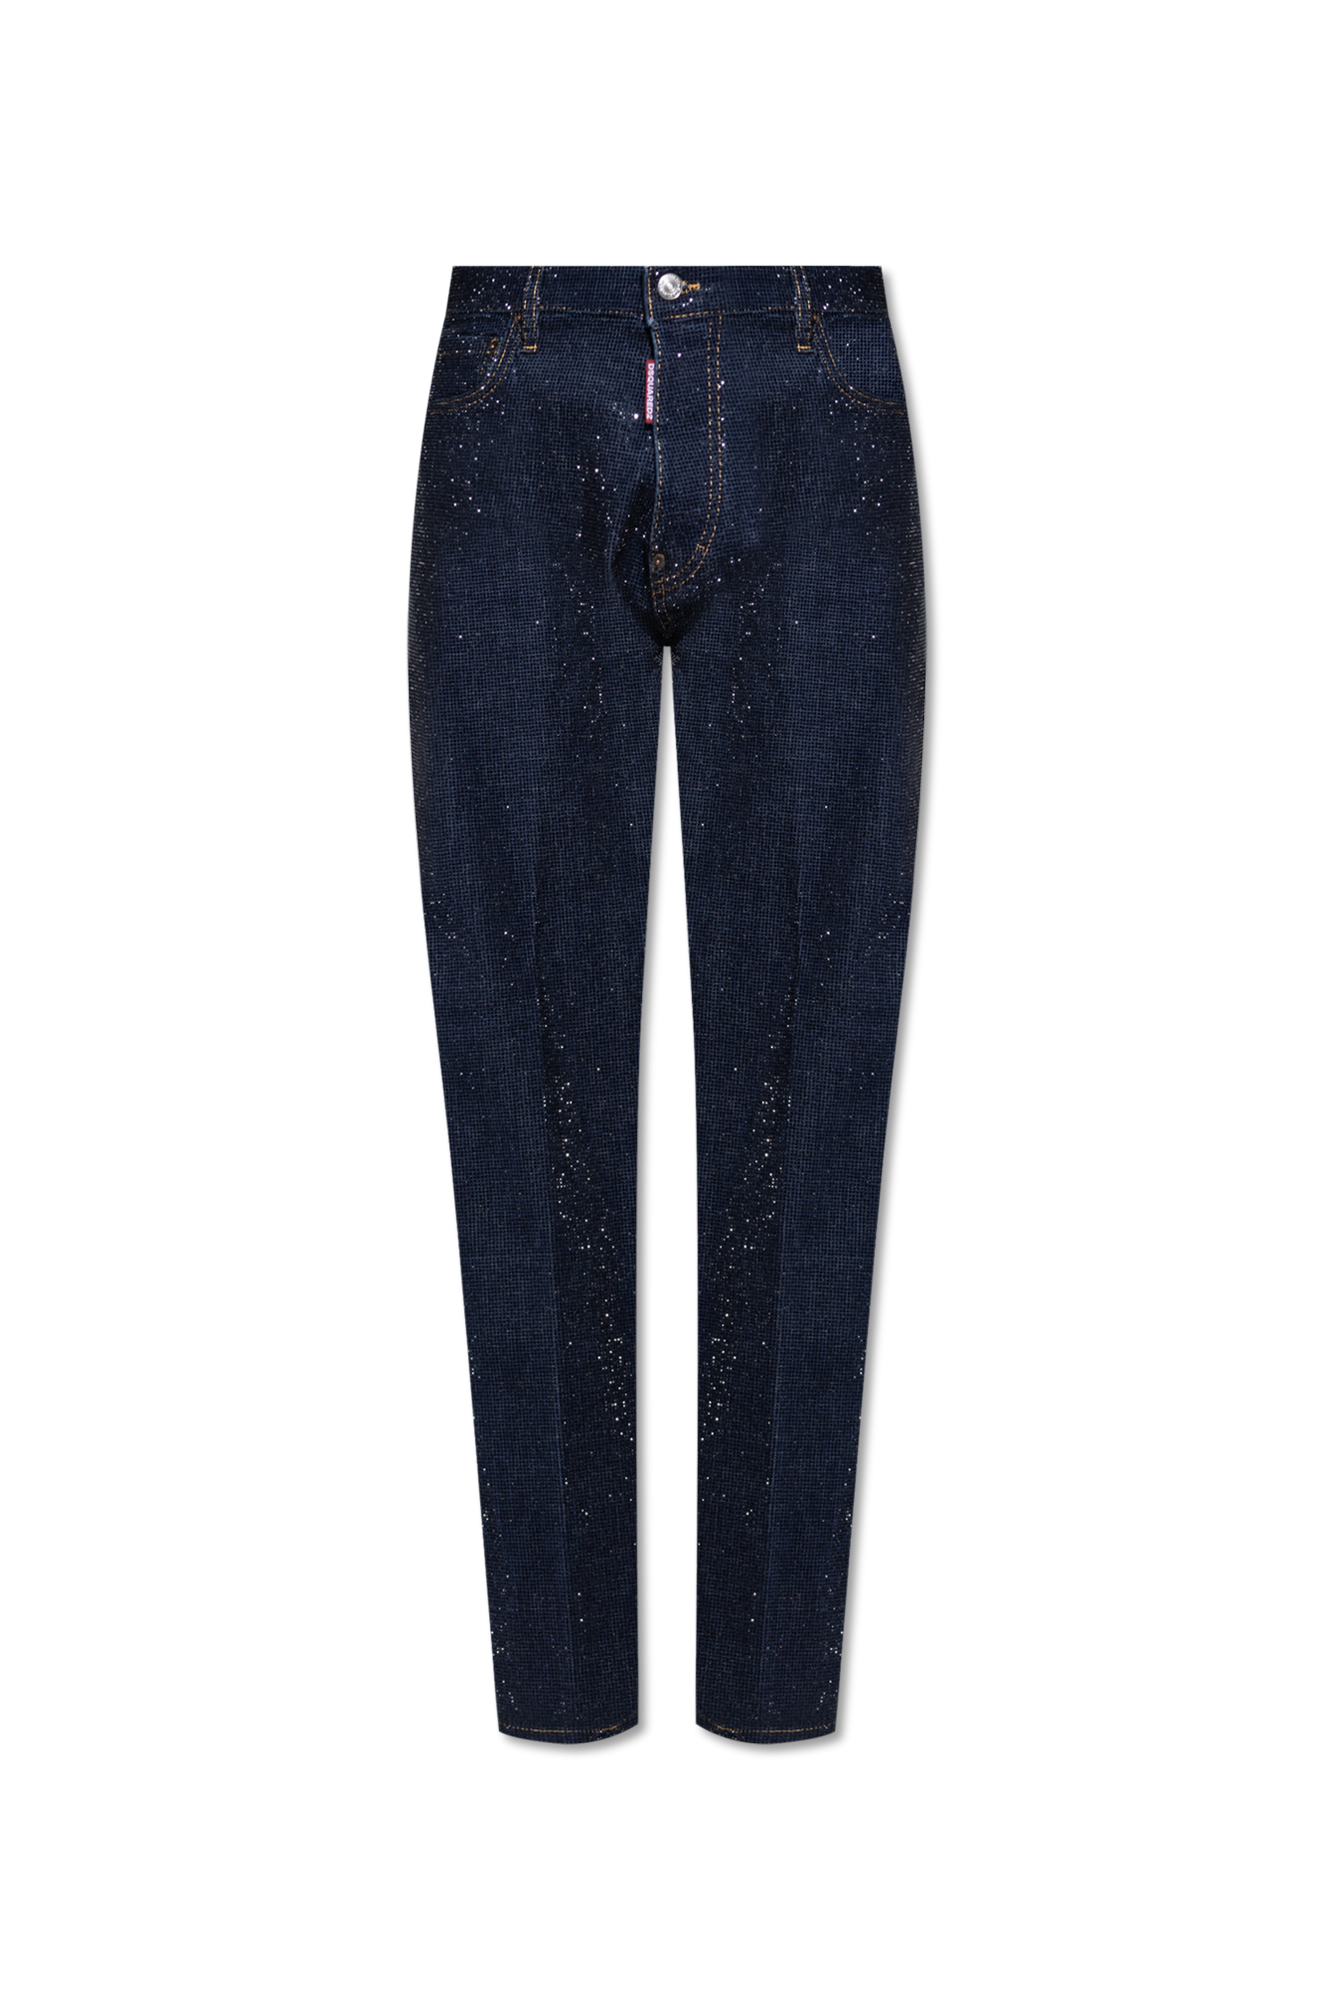 DSQUARED2 642 Patchwork Skinny Jeans